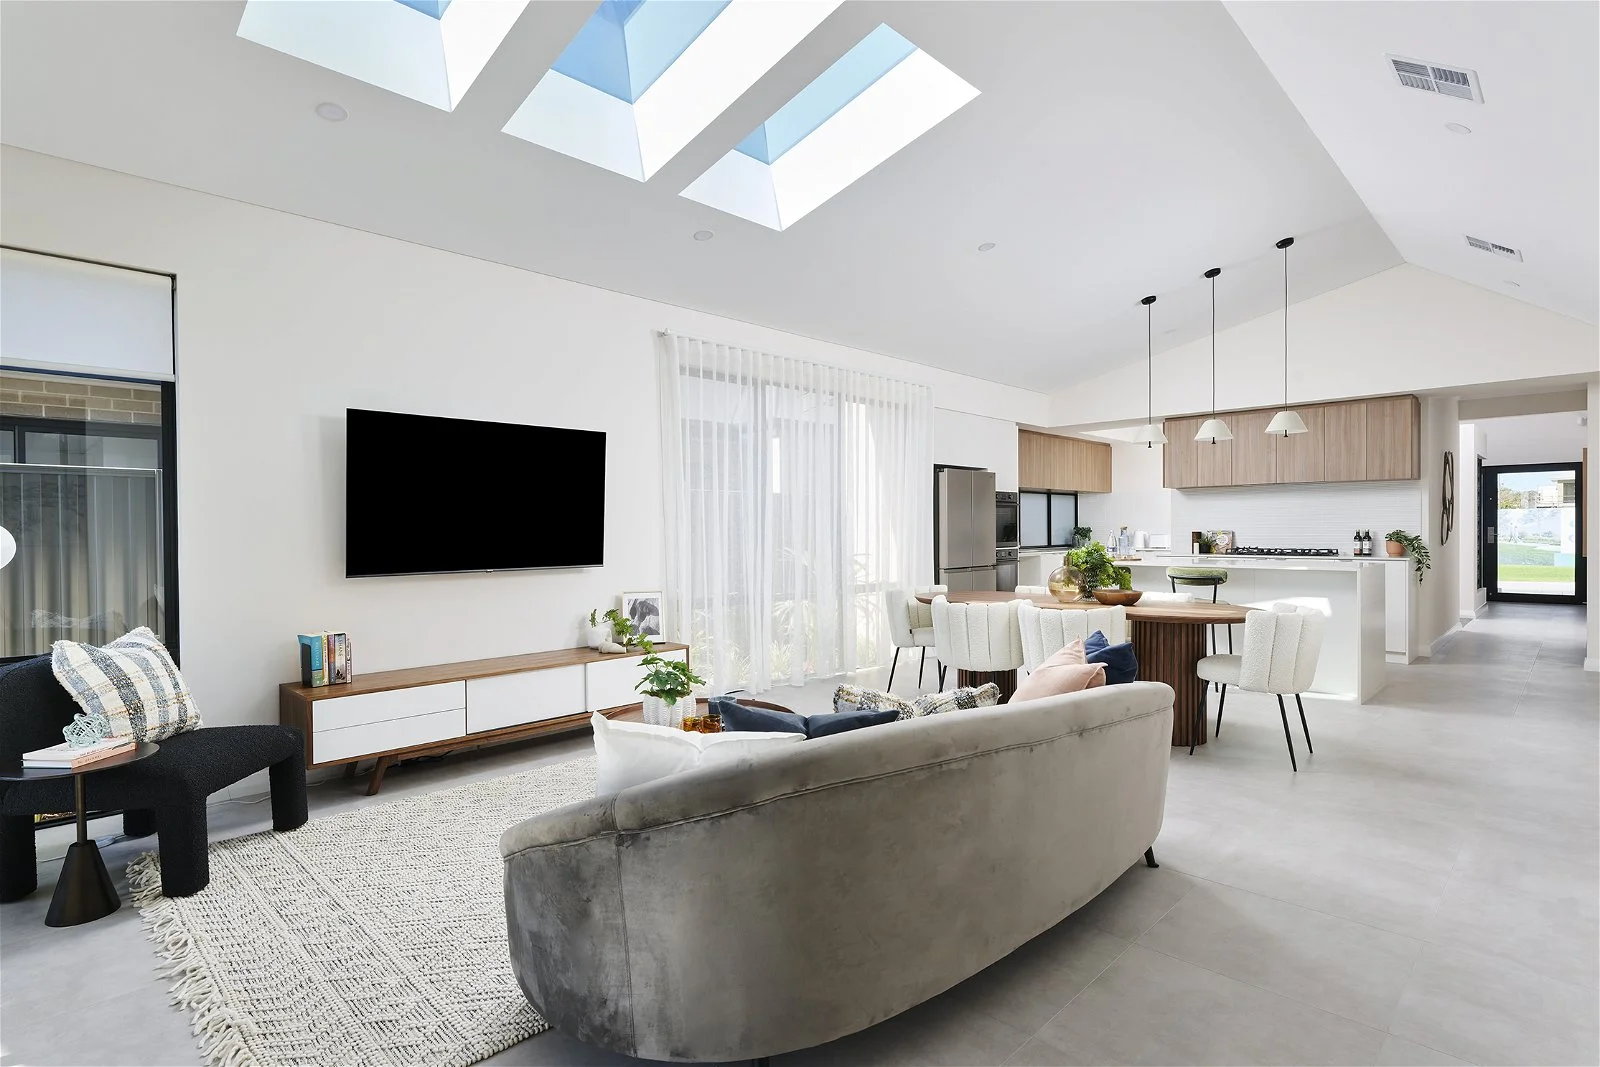 Avenue narrow lot display home by Plunkett. This design features an abundance of windows, high ceilings and skylights filling the entire space with natural light.